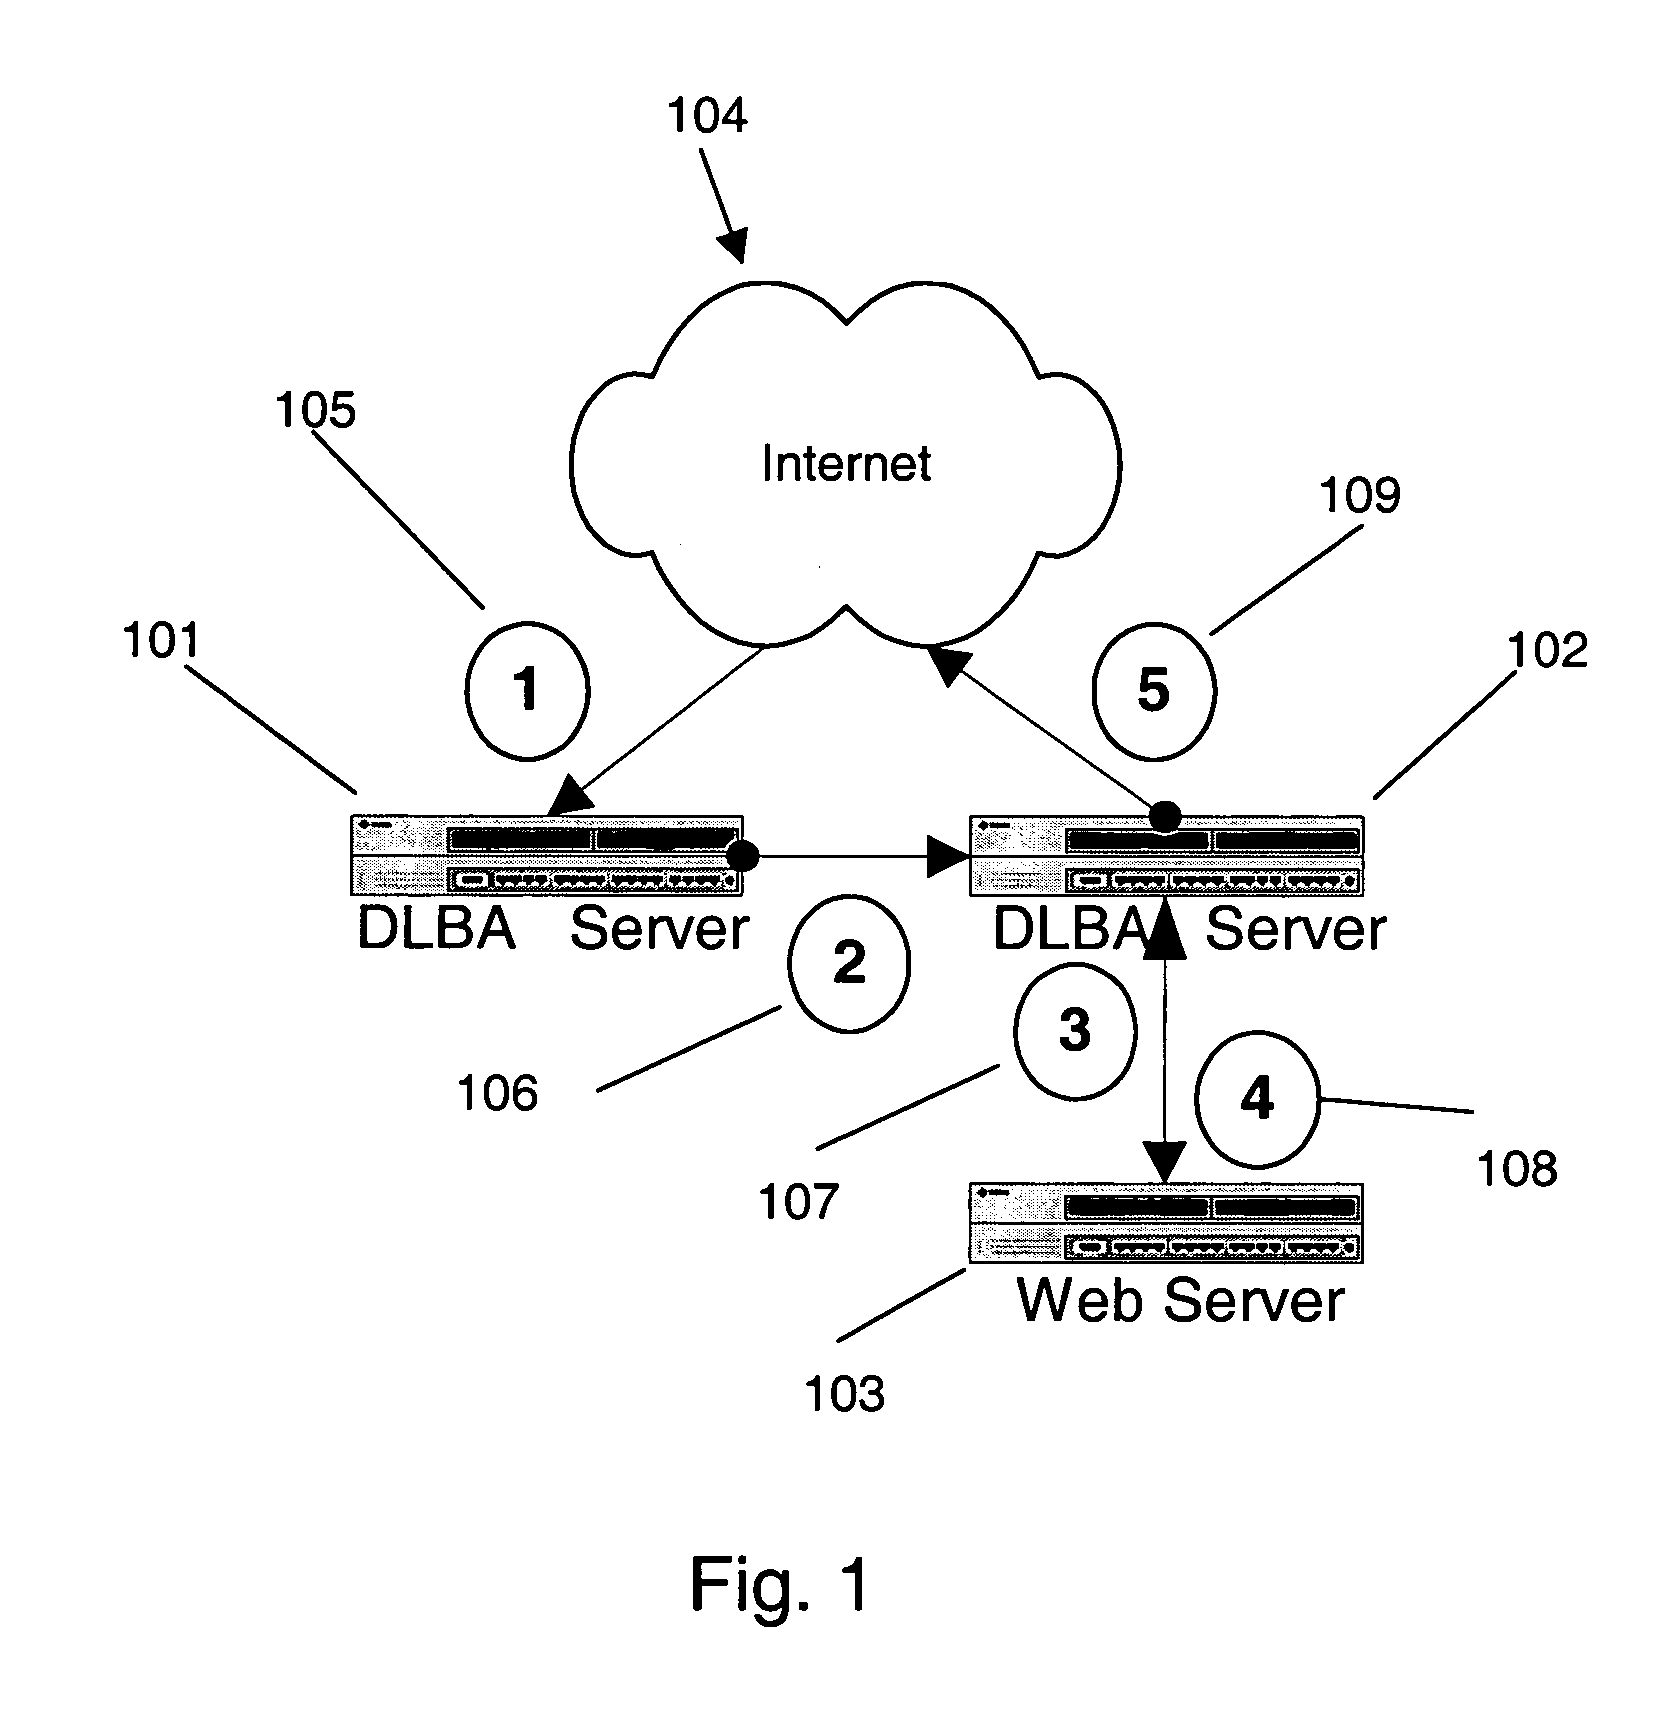 Load balancing array packet routing system